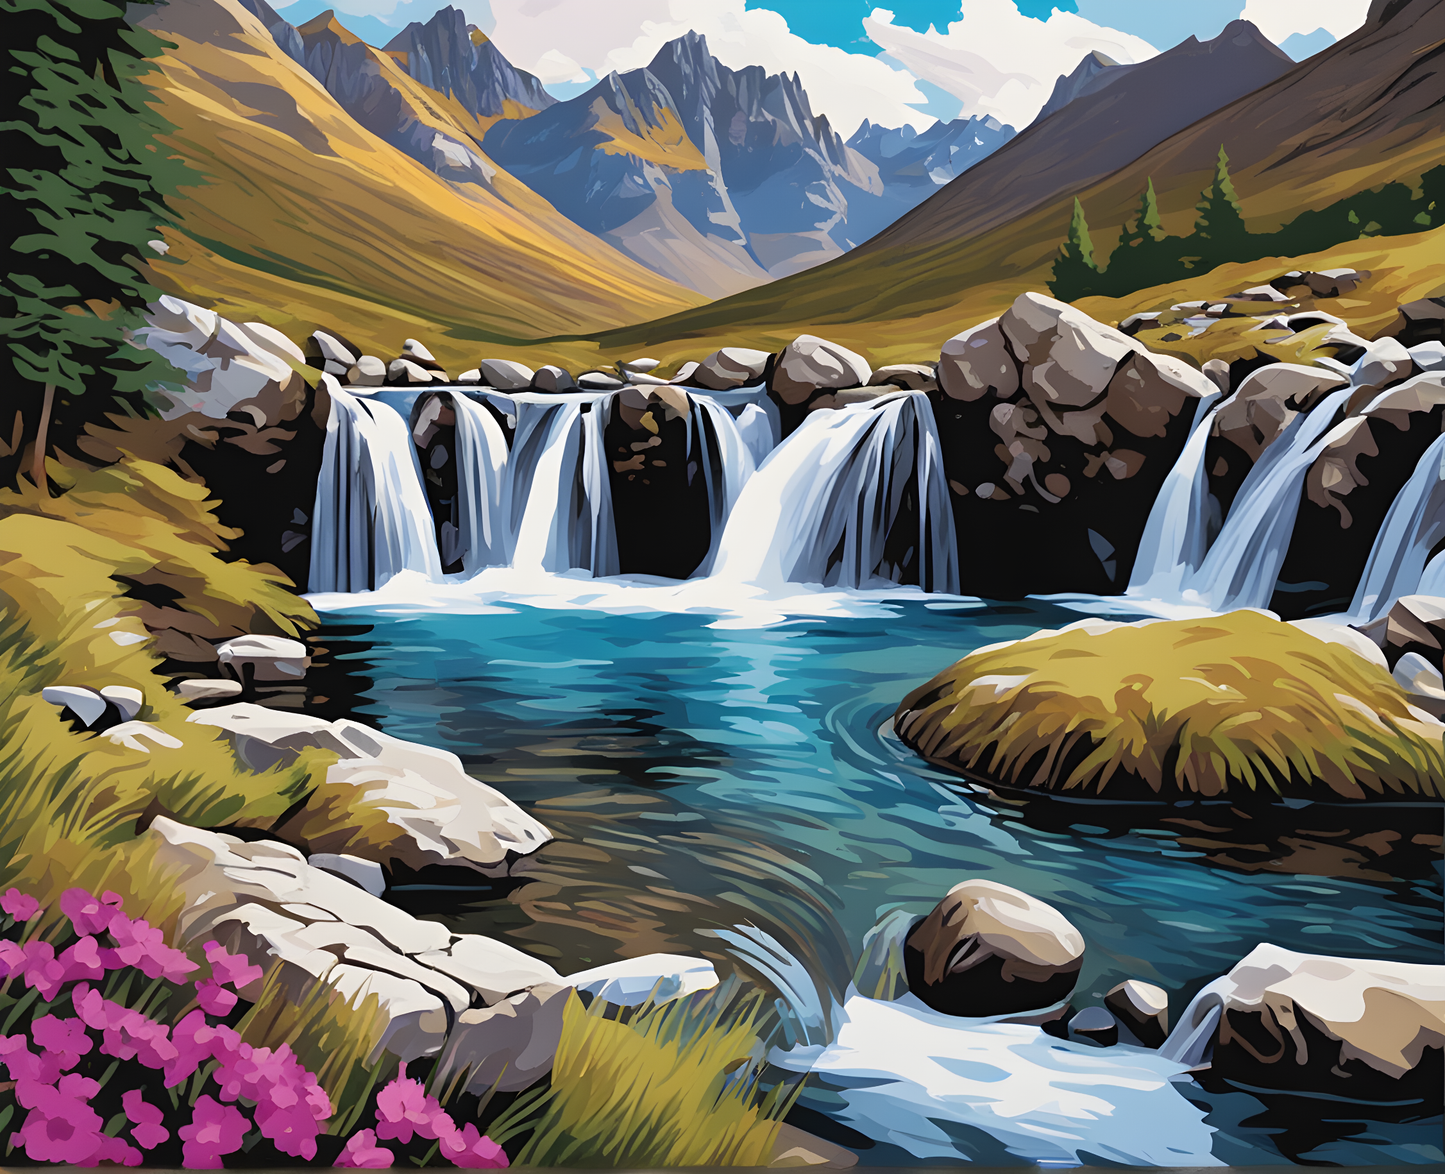 Amazing Places OD (471) - The Fairy Pools. Isle of Skye, Scotland - Van-Go Paint-By-Number Kit